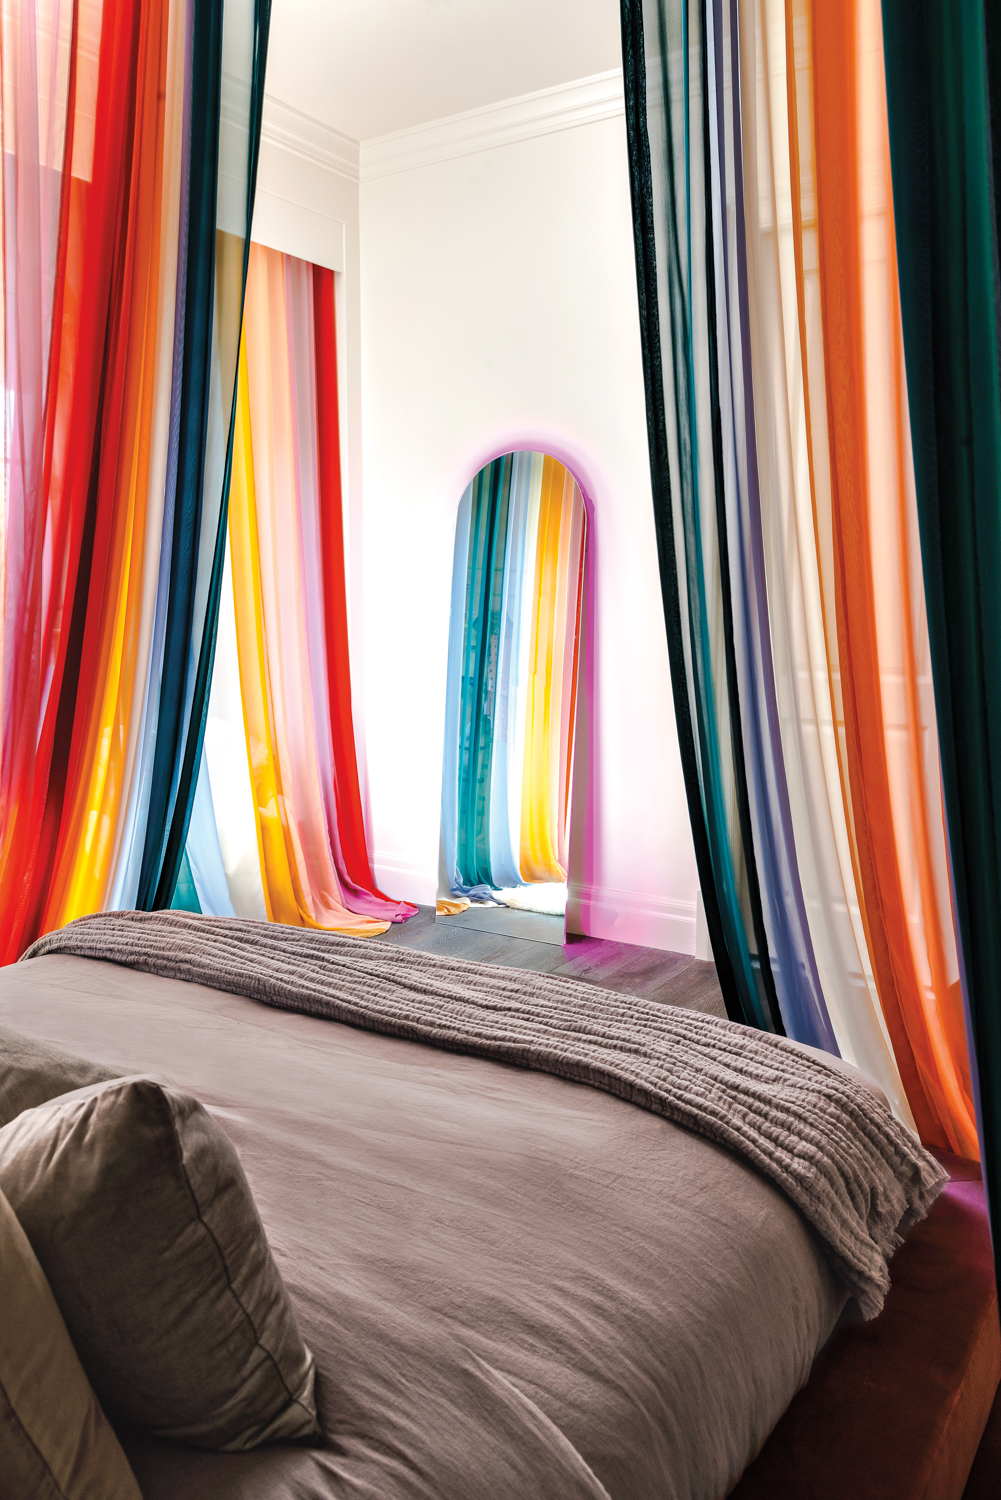 A bedroom with raninbow drapes.